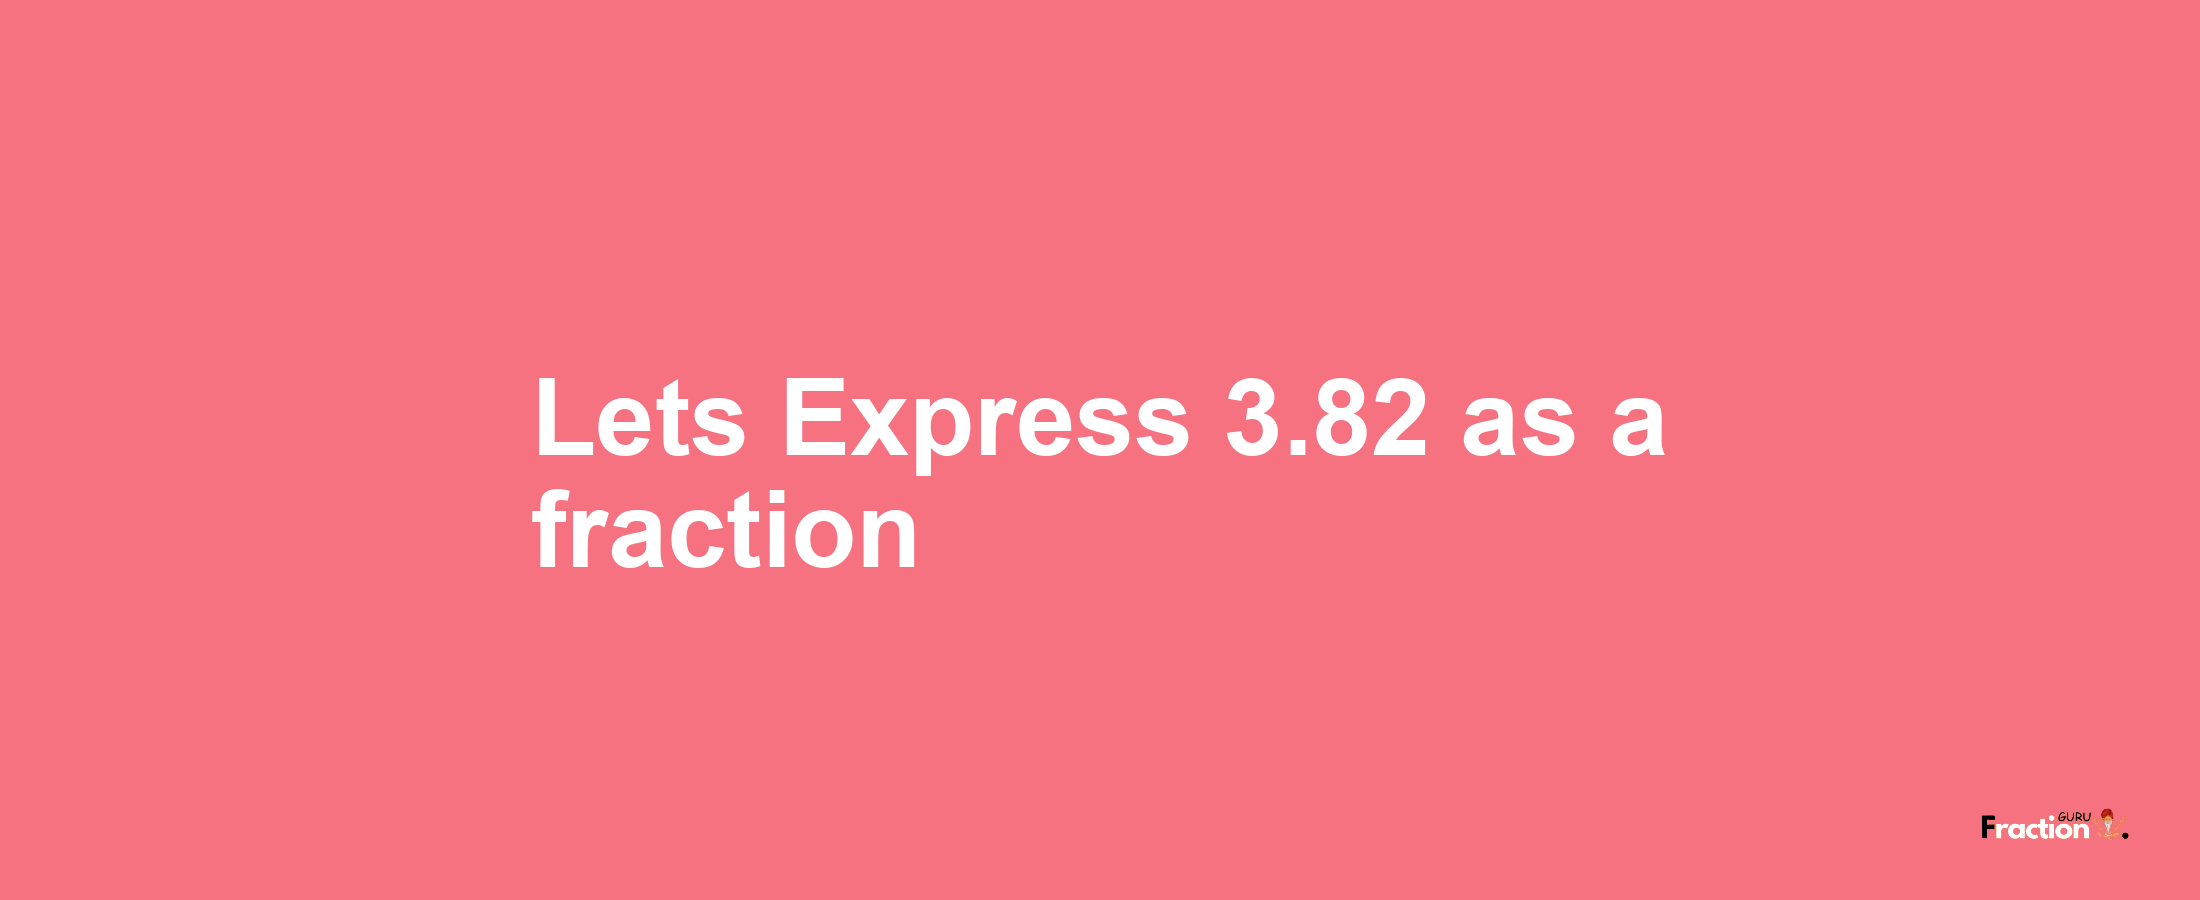 Lets Express 3.82 as afraction